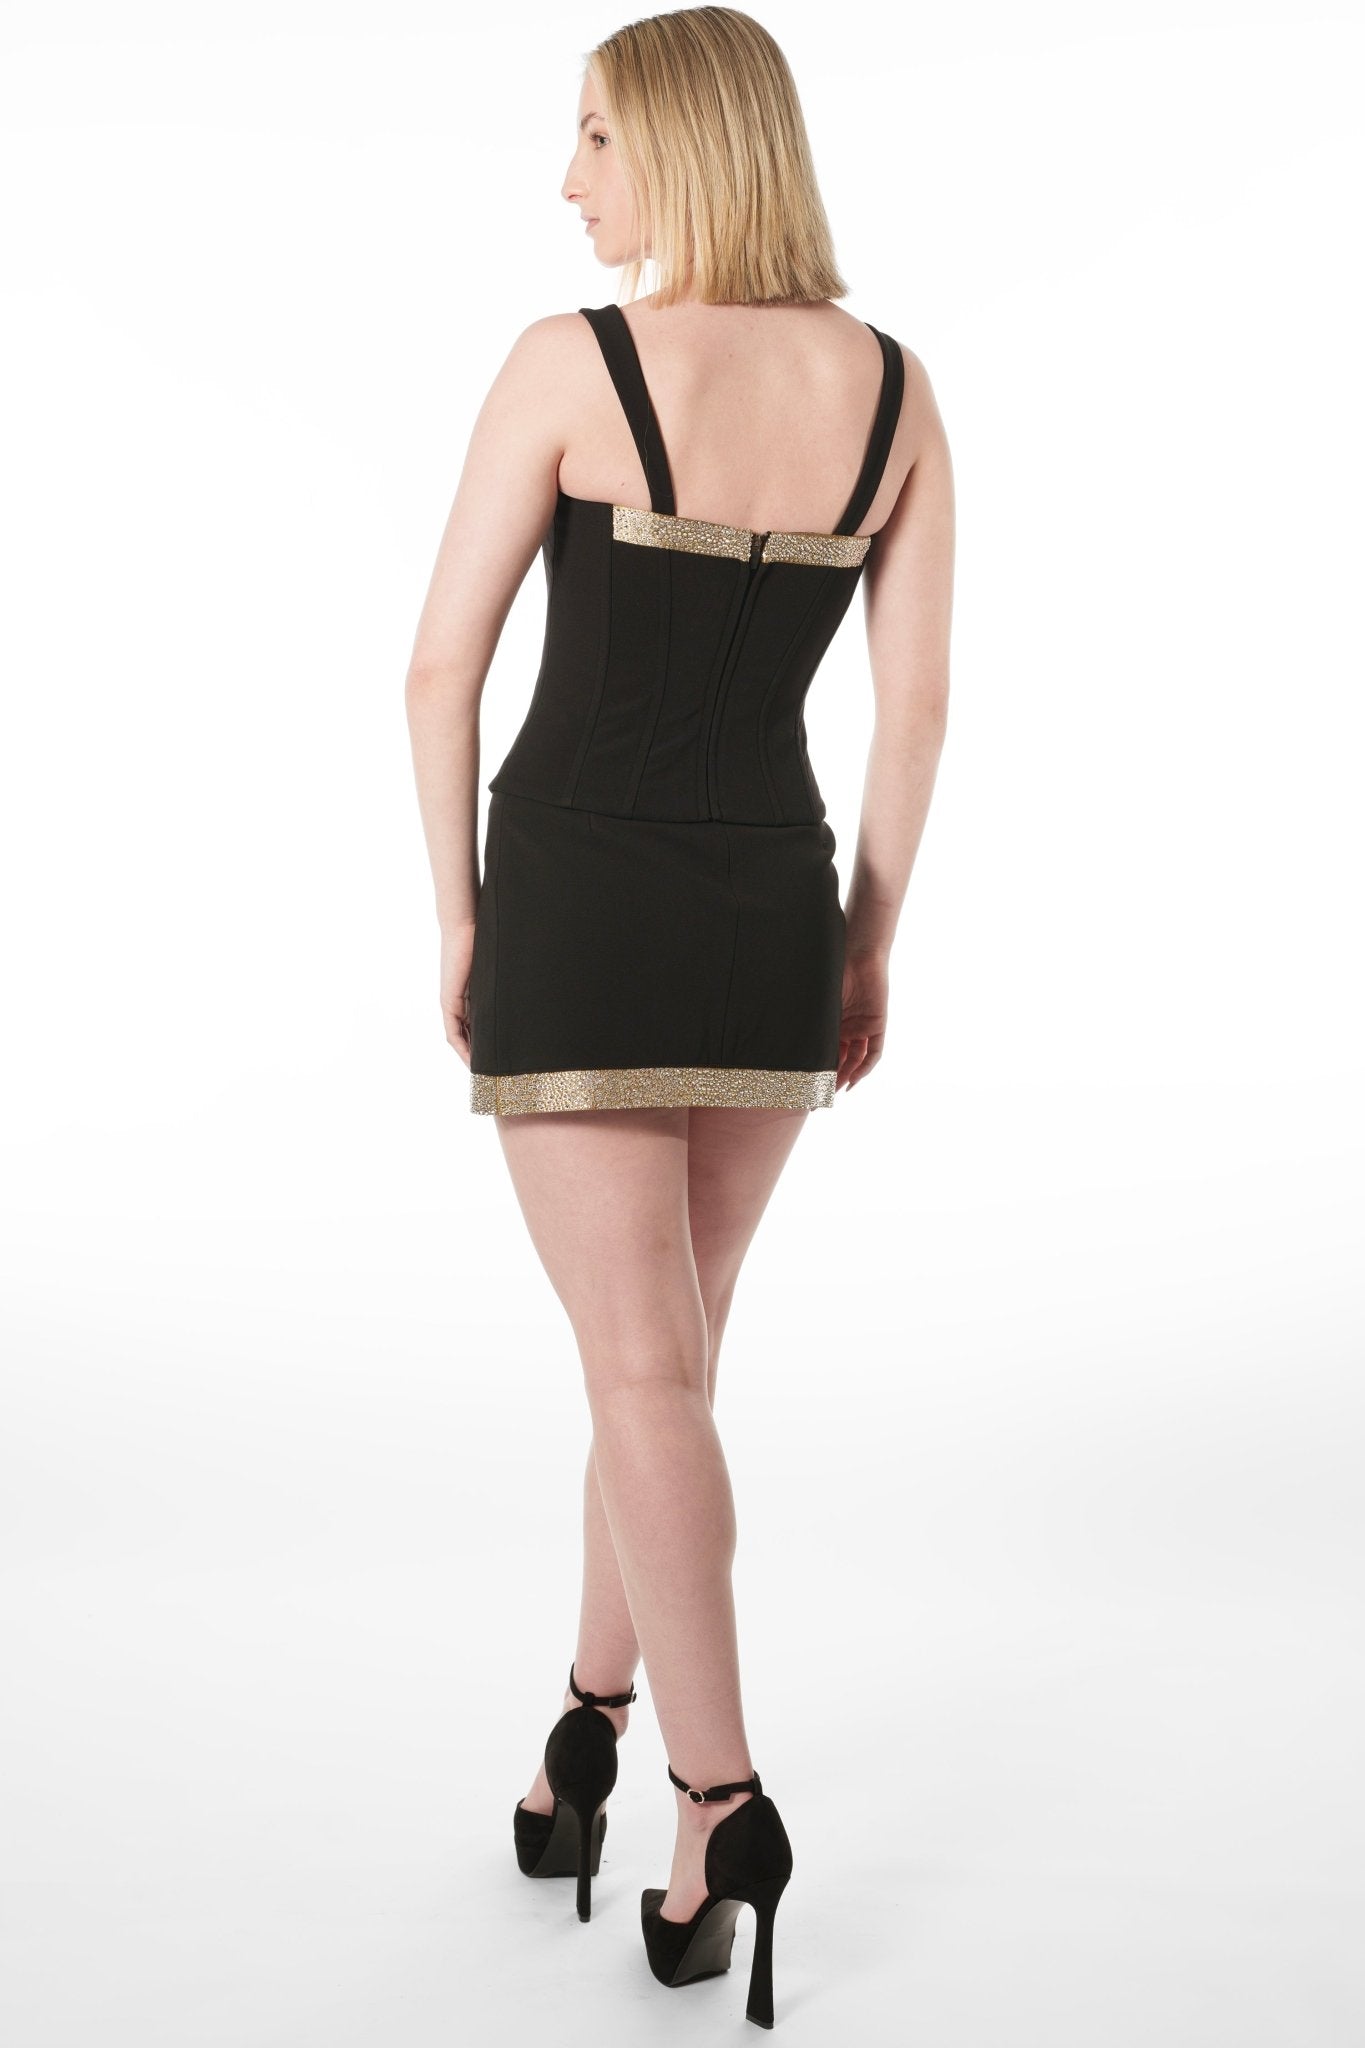 EVIE Bustier Uniform Top for gaming, casino, hotel, restaurants, hospitality, and resorts. Black corset uniform with gold brocade and crystal stone accents. Fully lines with boning.- KAPTVA Apparel